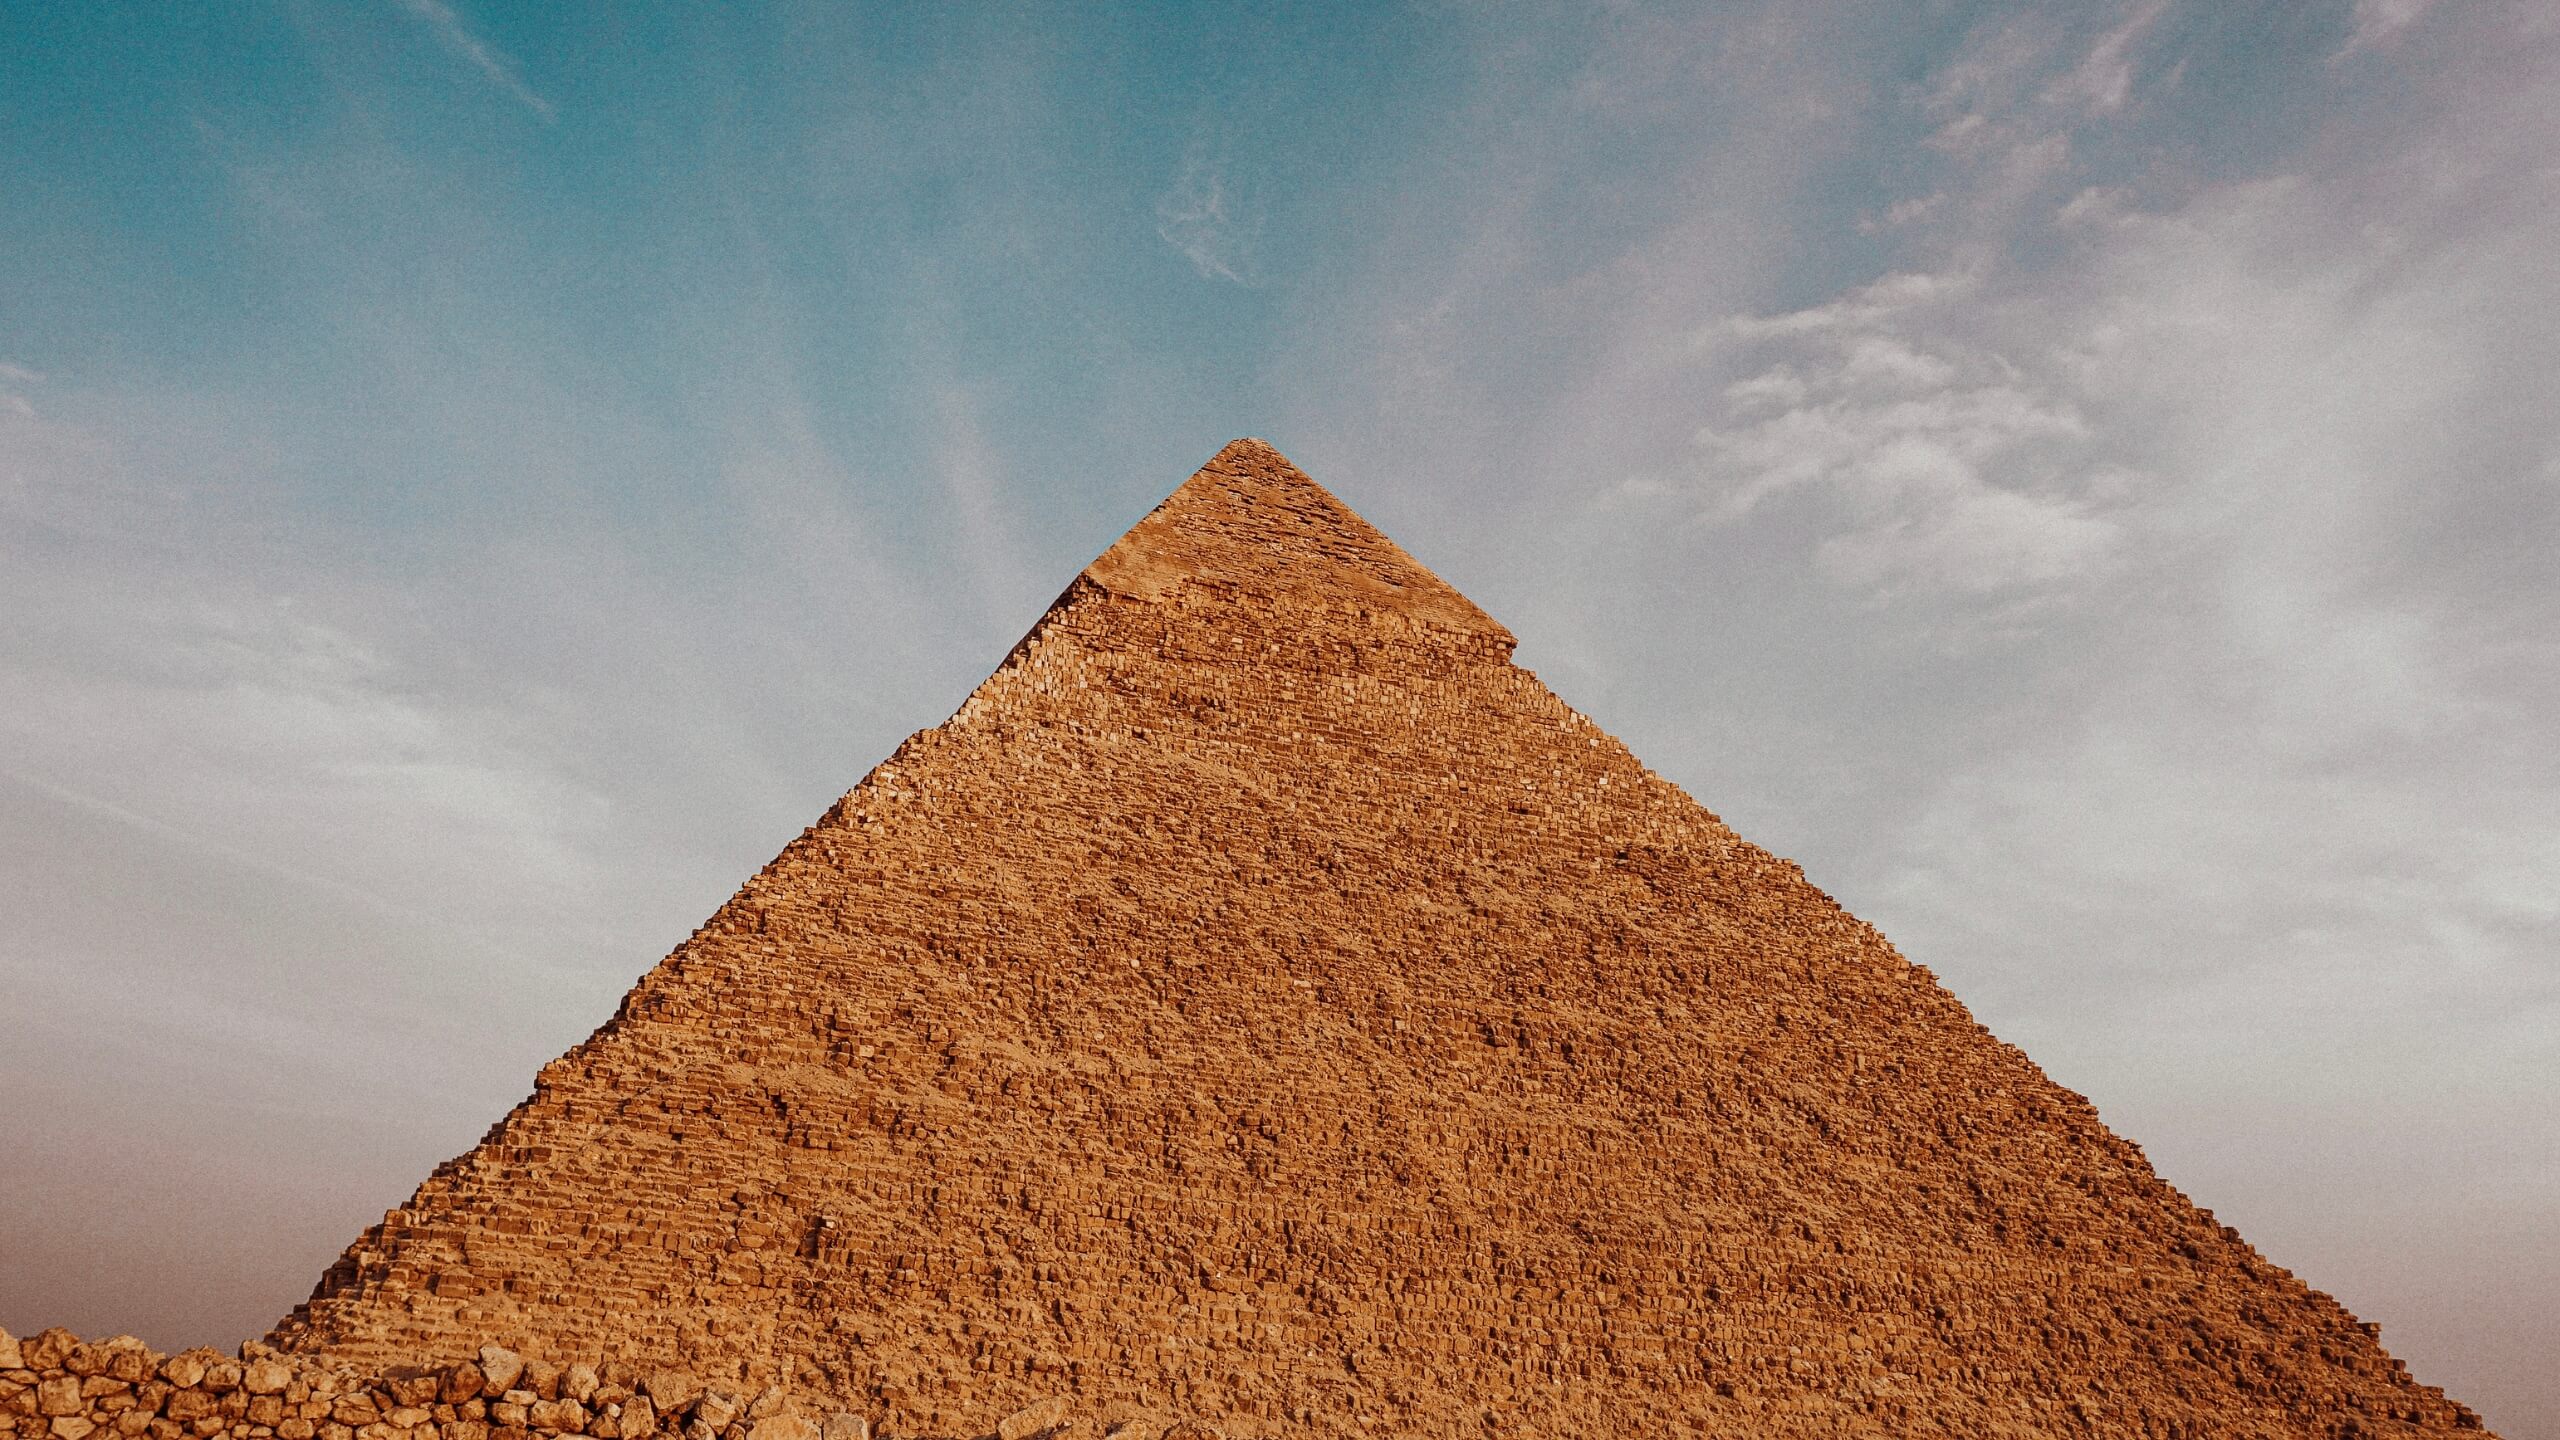 Close up image of the largest pyramid